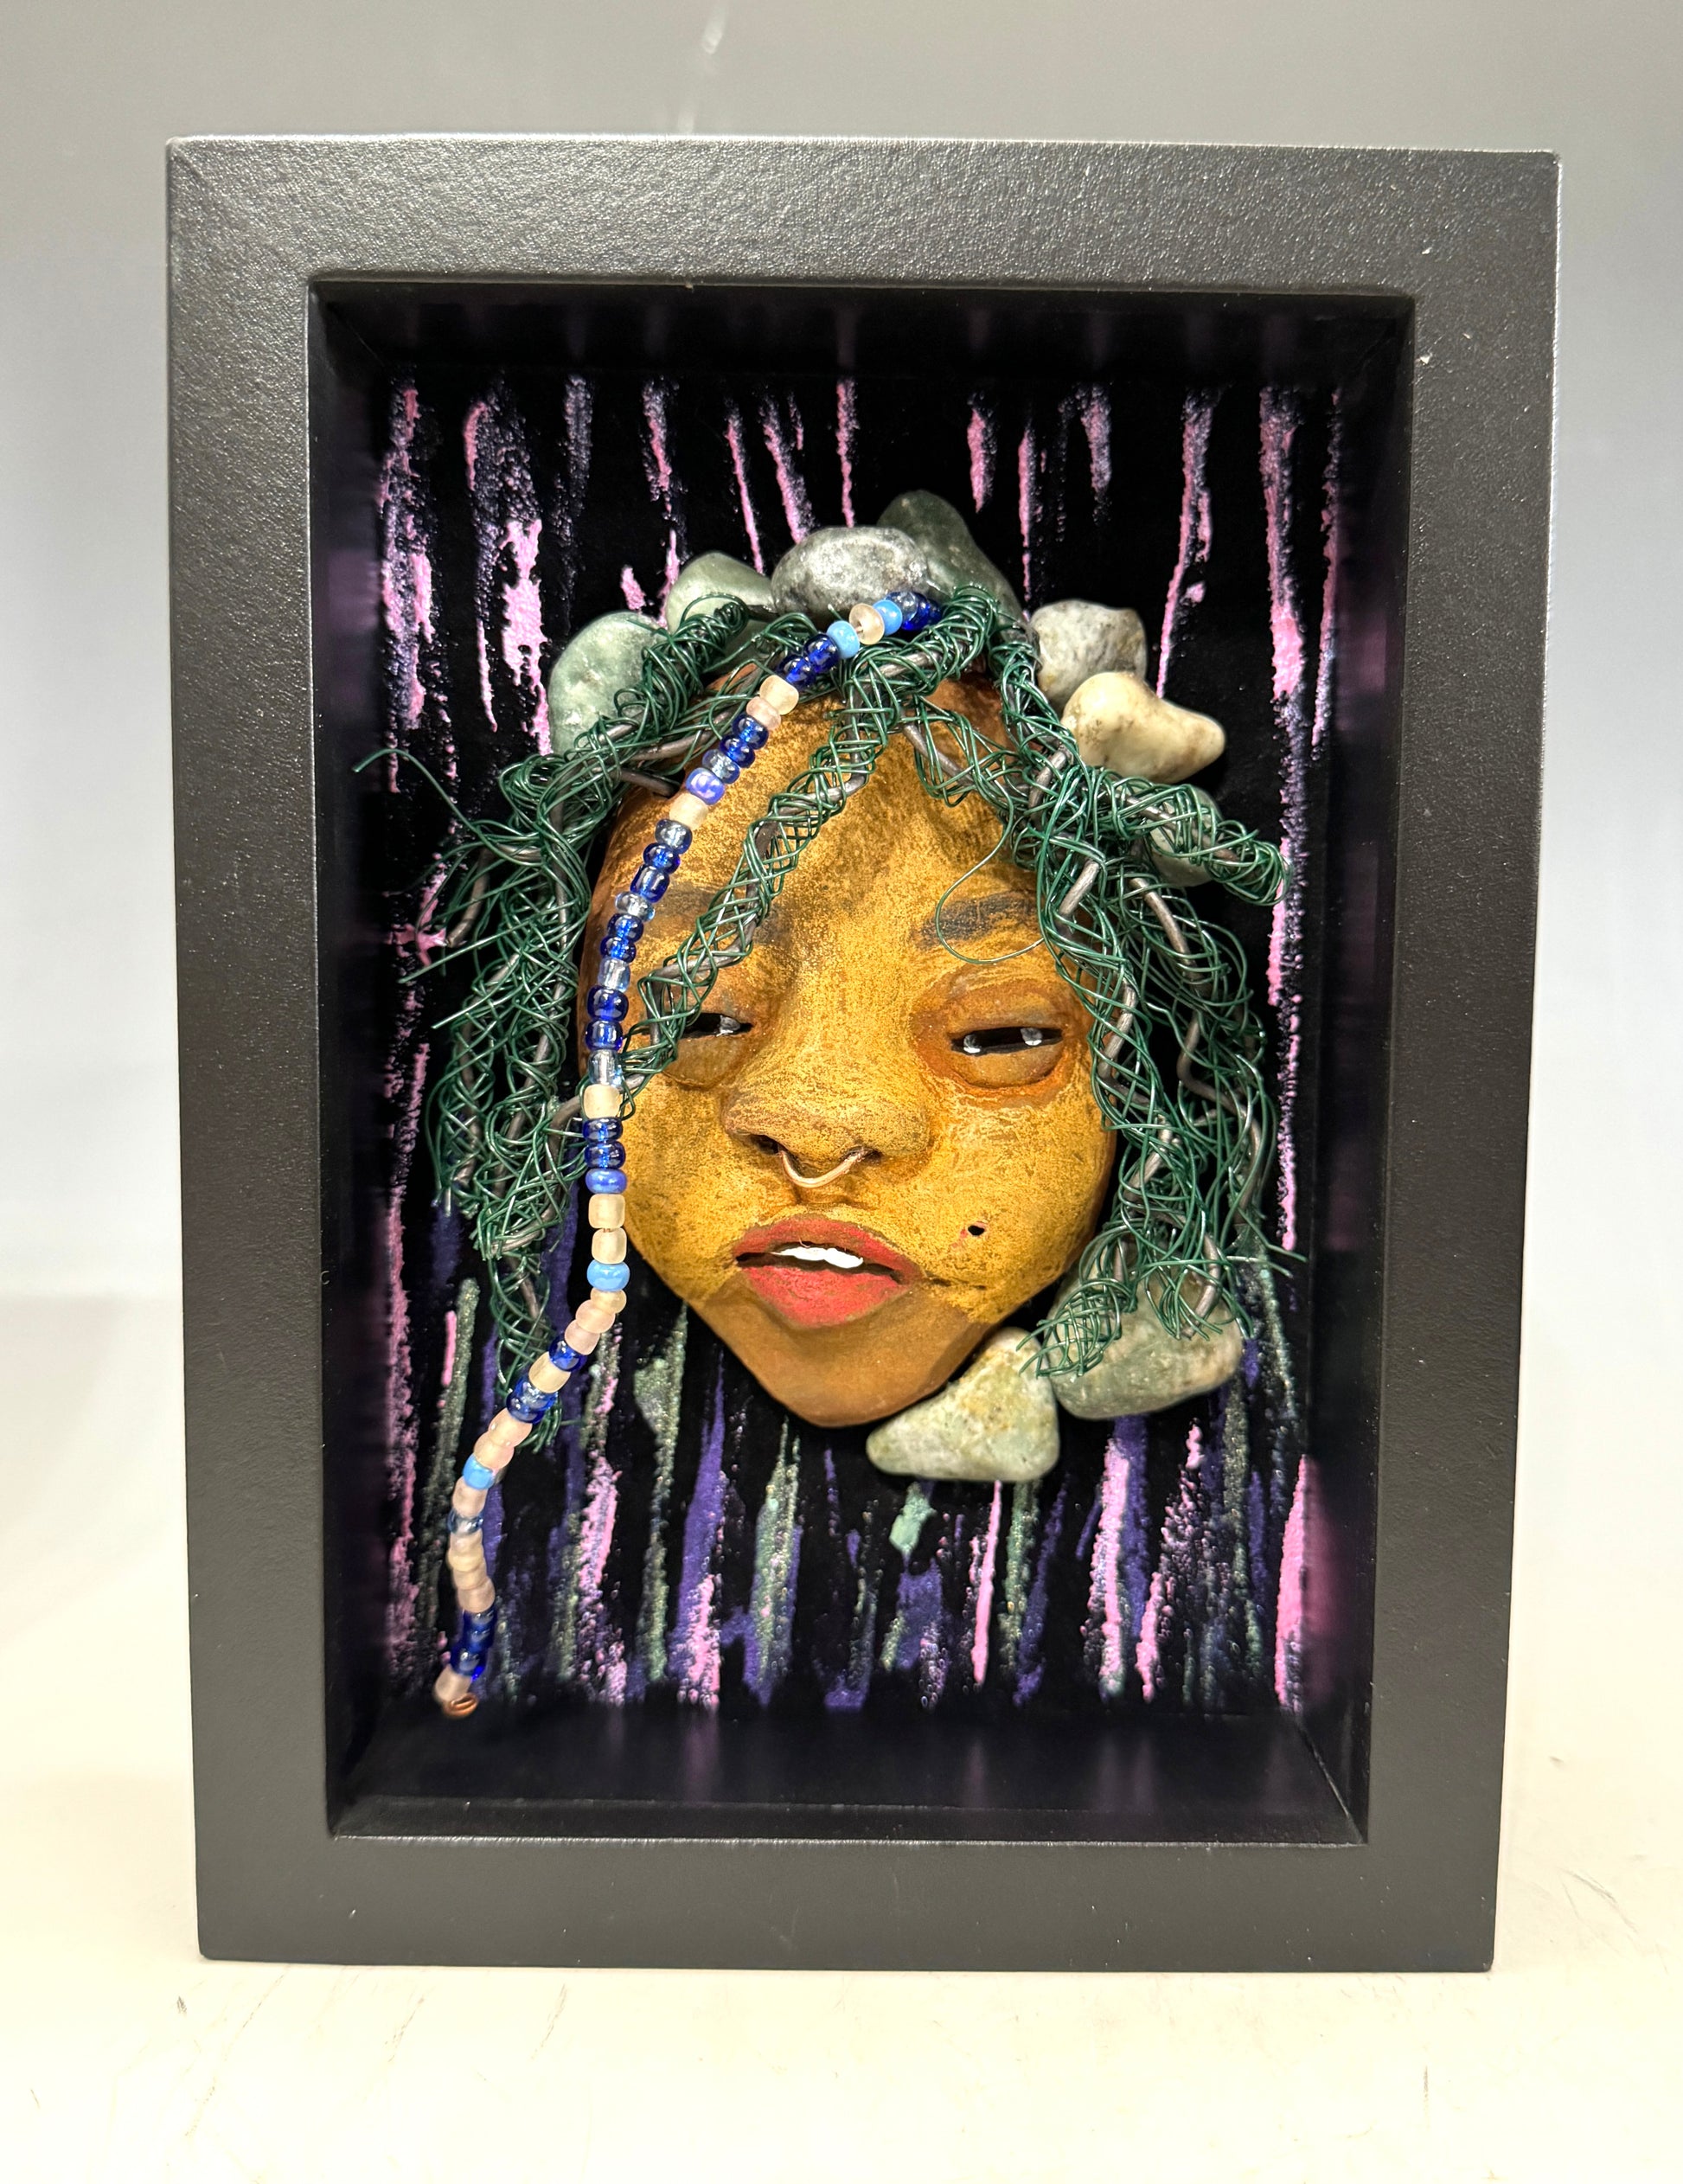 Introducing Beverly: A striking mixed media mask created using the raku firing method. The meticulously designed features showcase a beautiful honey brown complexion with subtle Ruby red lips and intricately woven hair made with 16 and 24 gauge wire. This exquisite piece is mounted on a hand-painted canvas, featuring a stunningly landscaped background, and elegantly presented in a glass covered 5" x 7" black shadowbox.